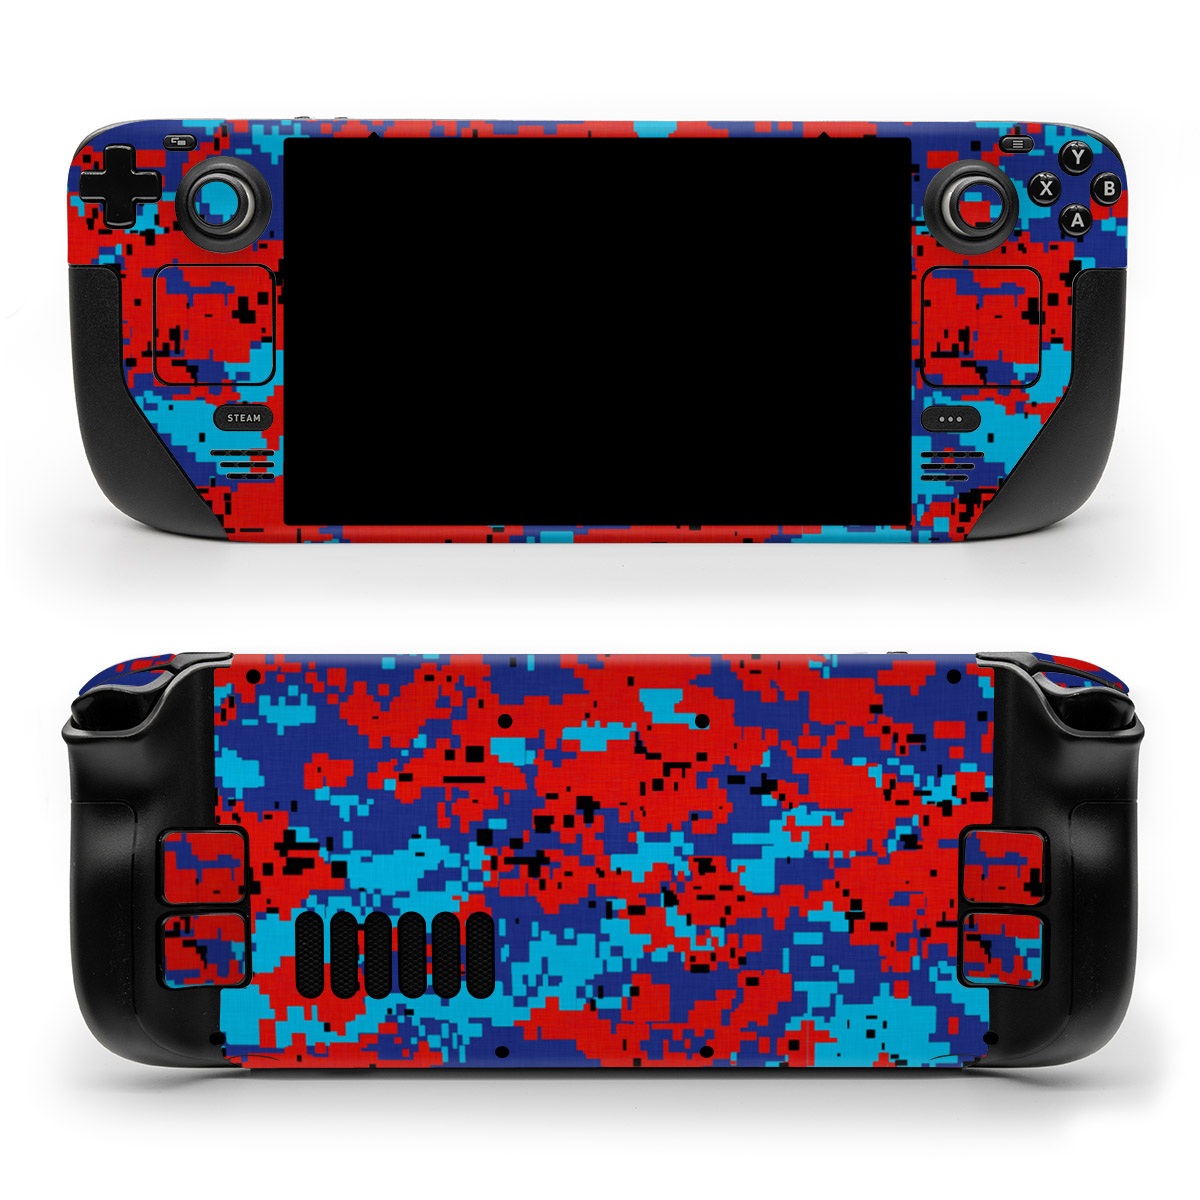 Valve Steam Deck Skin design of Blue, Red, Pattern, Textile, Electric blue, with blue, red colors